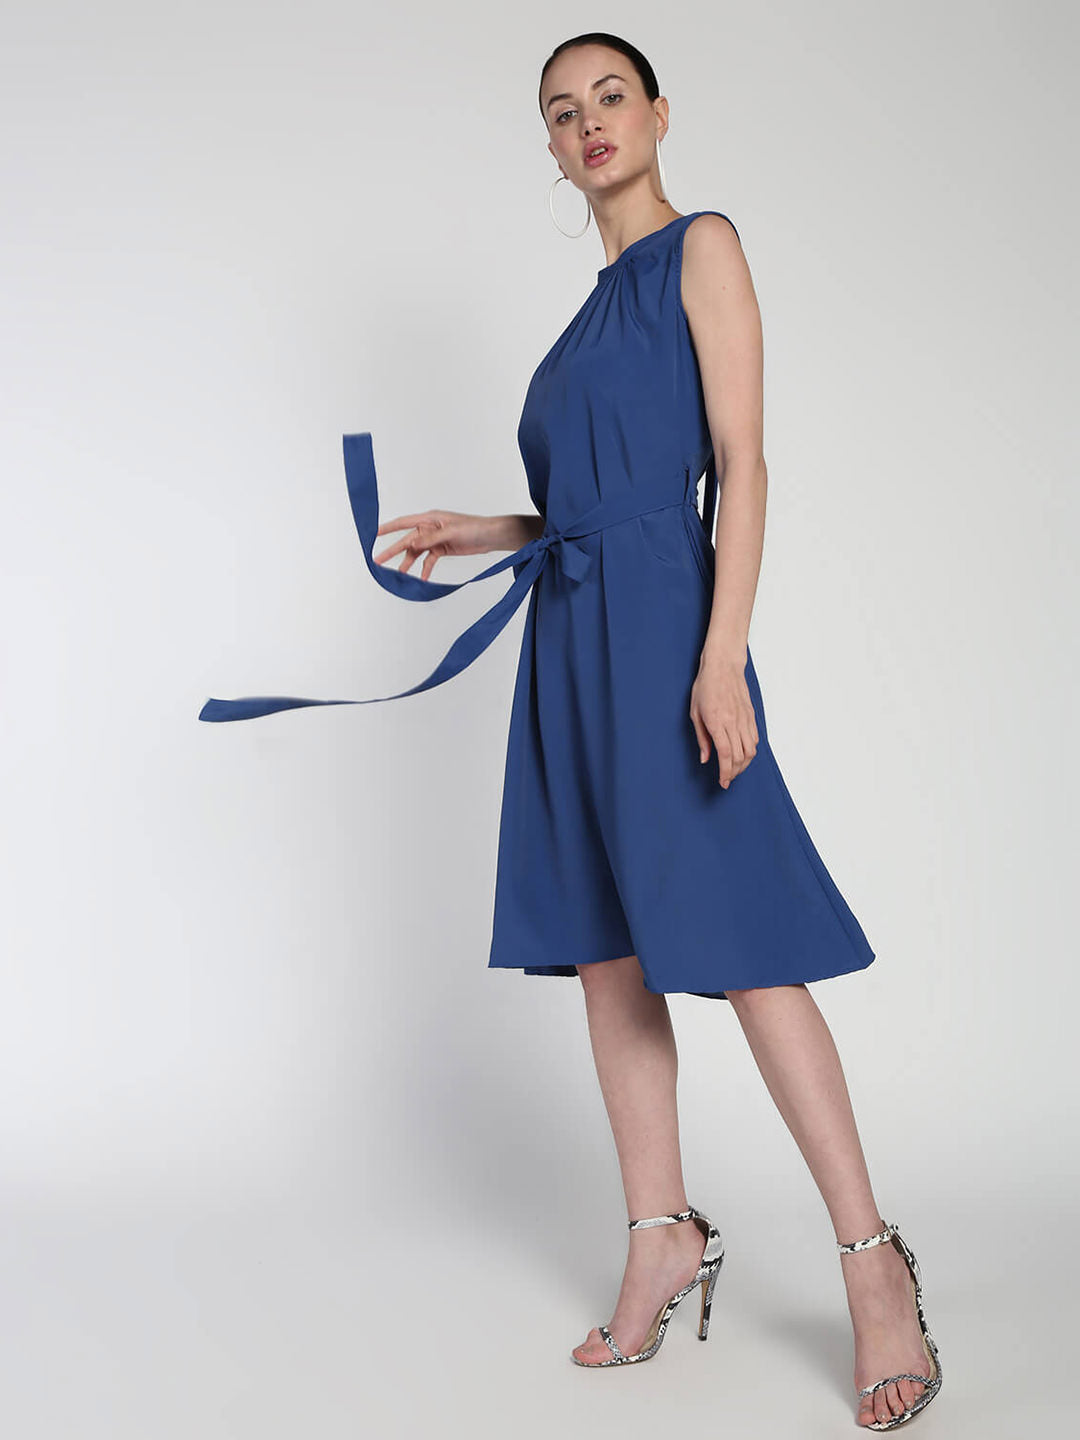 Belted Polycrepe dress with Neck detail